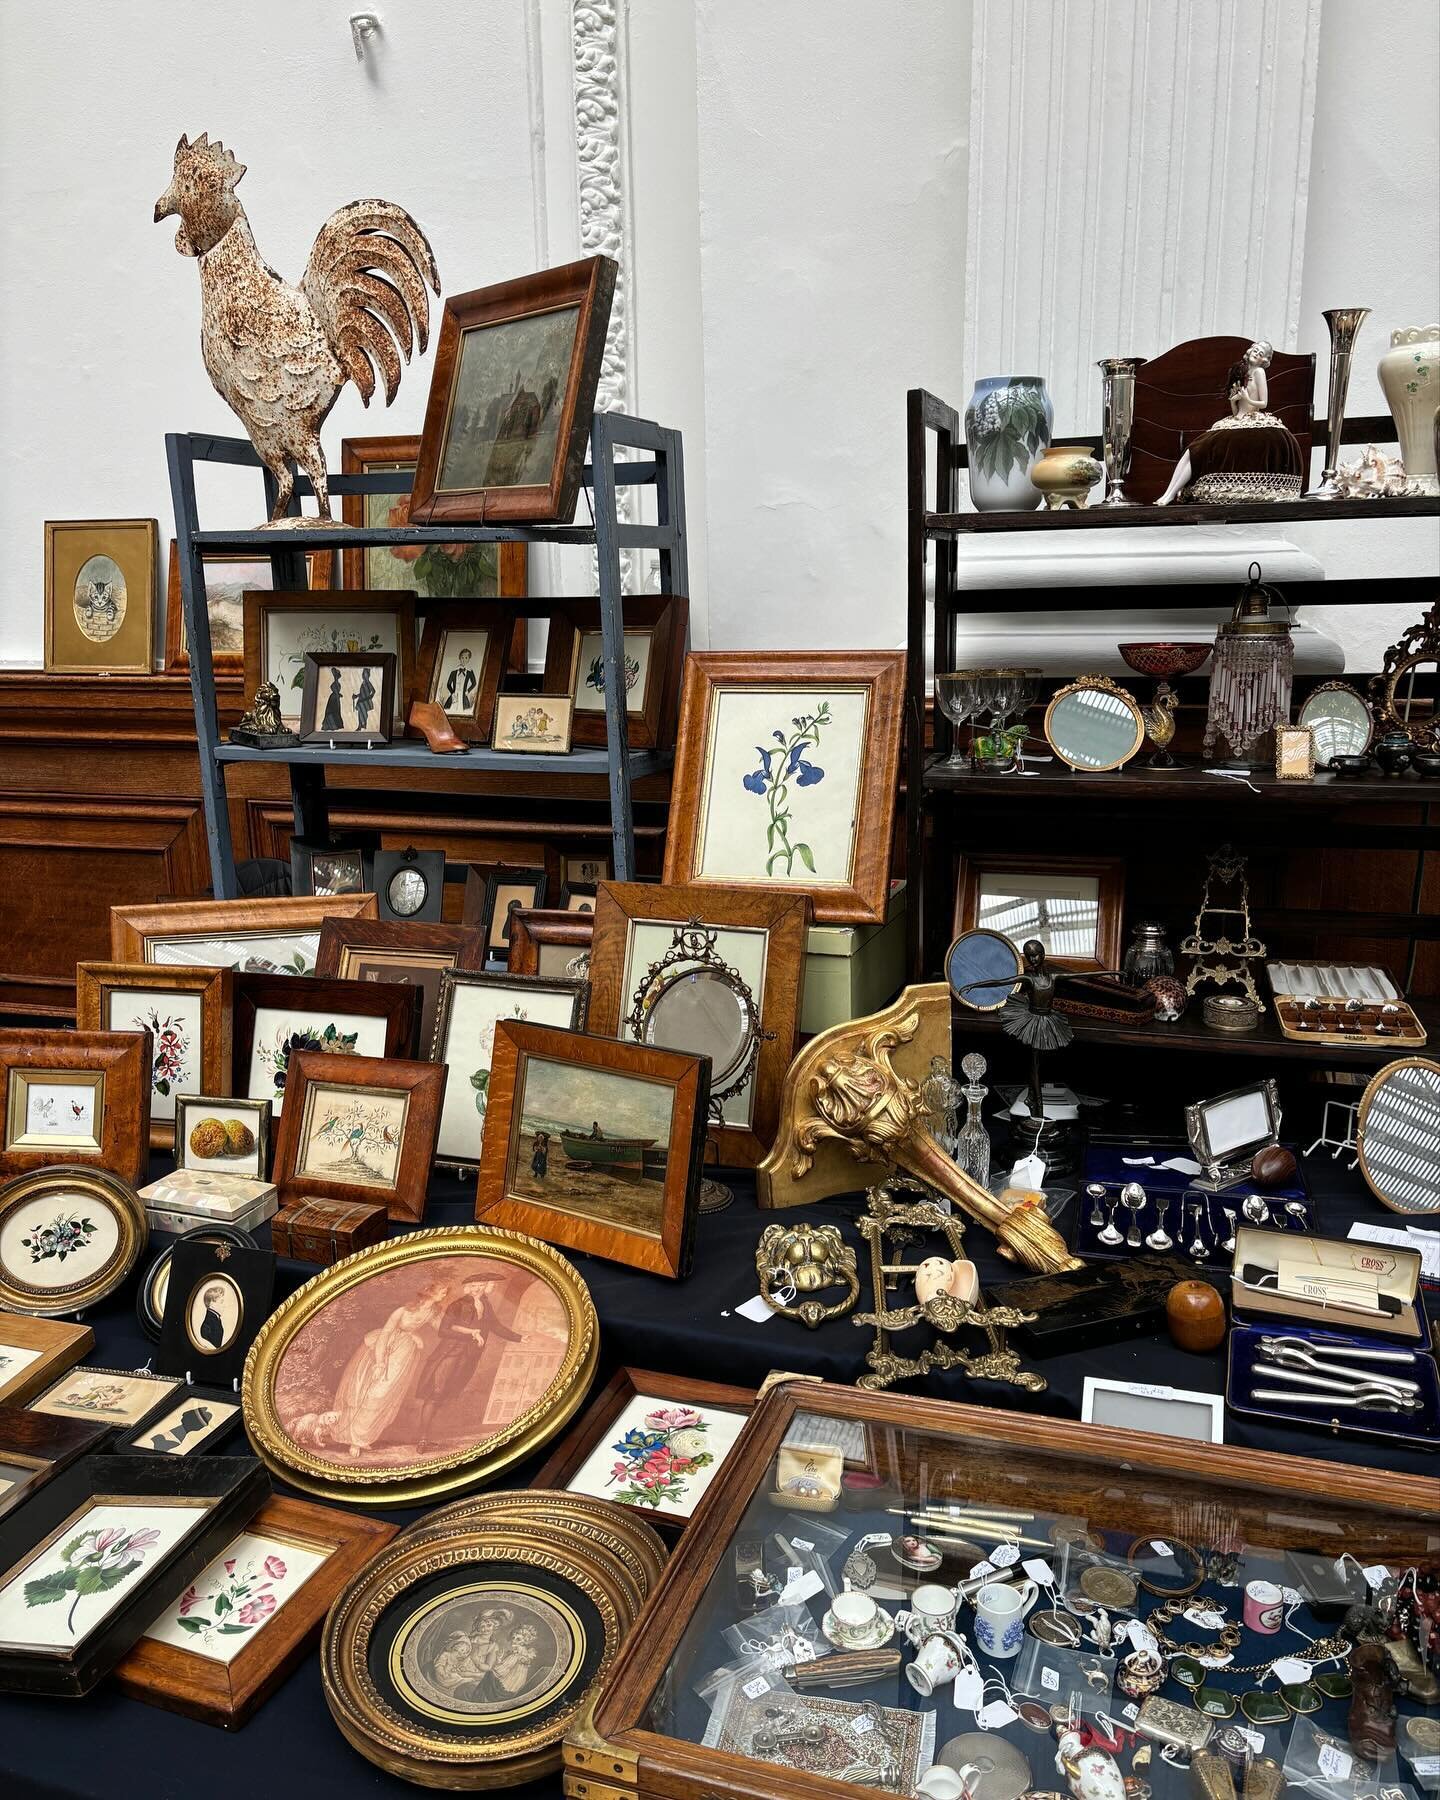 And we&rsquo;re open for our March antiques fair! Lots of great pieces today for our last event before the Easter break. Follow our stories for more 👁️

Adams Antiques Fairs
Sunday 24th March
10am - 4.30pm
The Royal Horticultural Halls
Elverton Stre